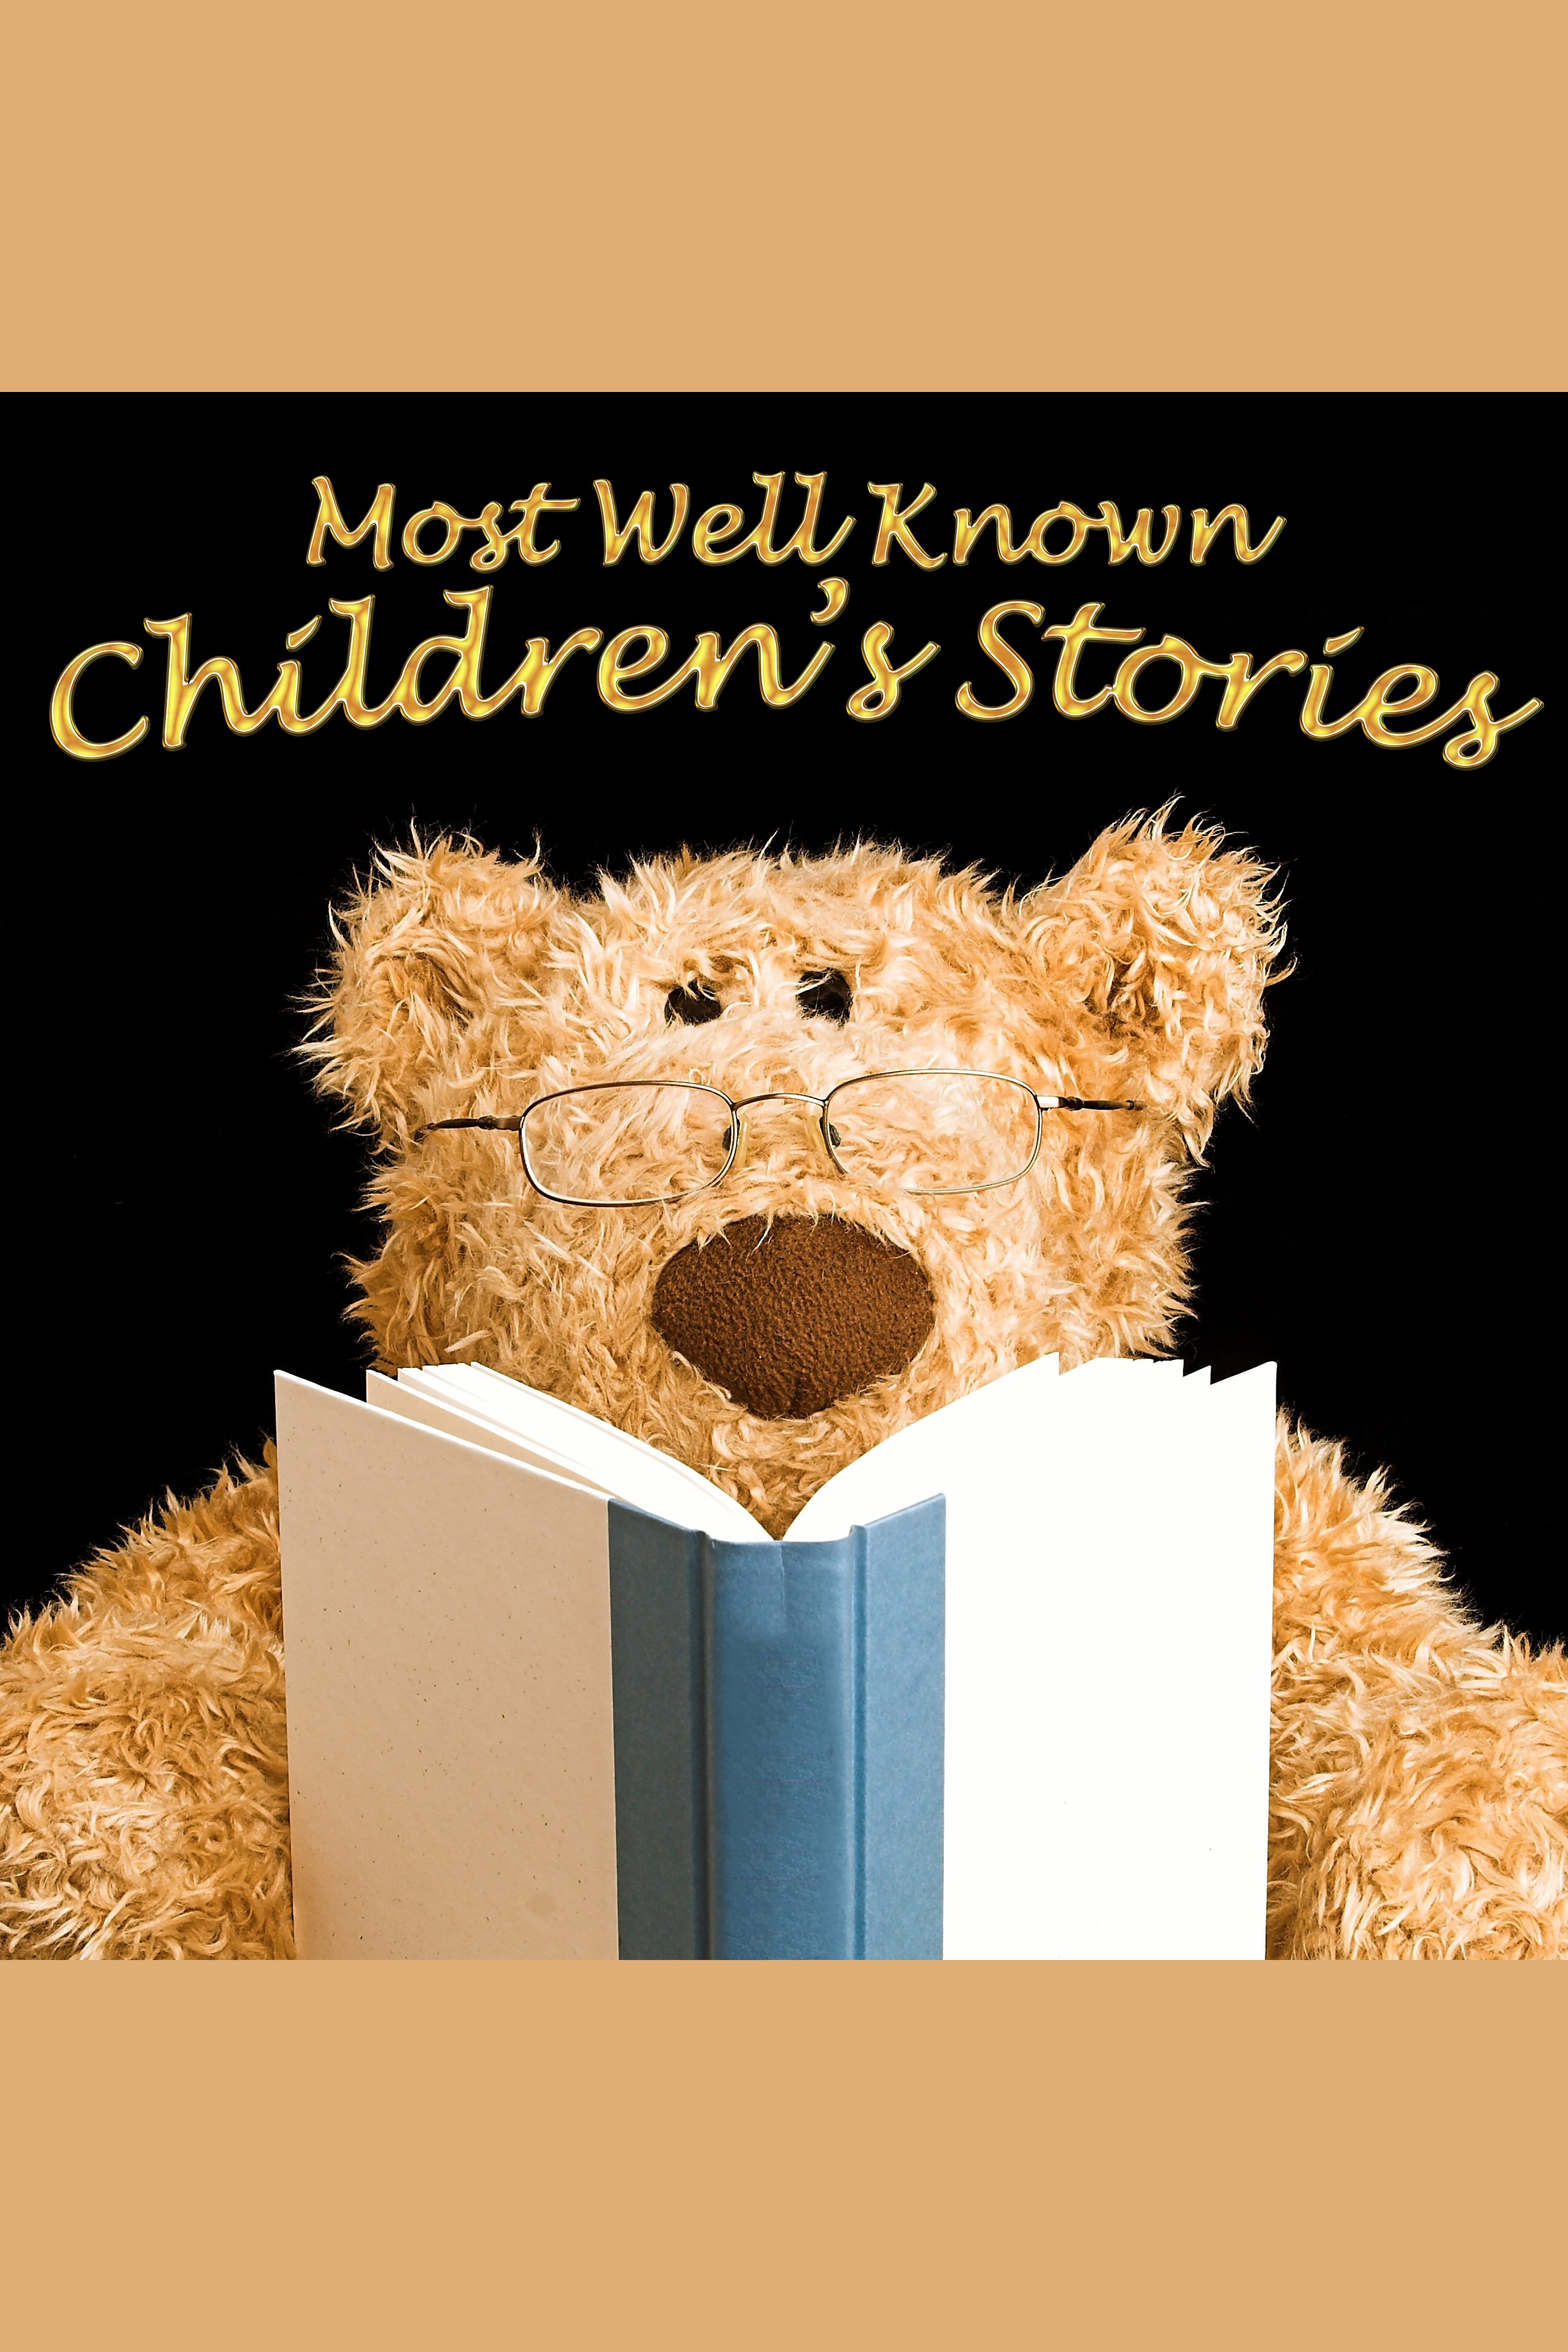 Most Well Known Children's Stories cover image